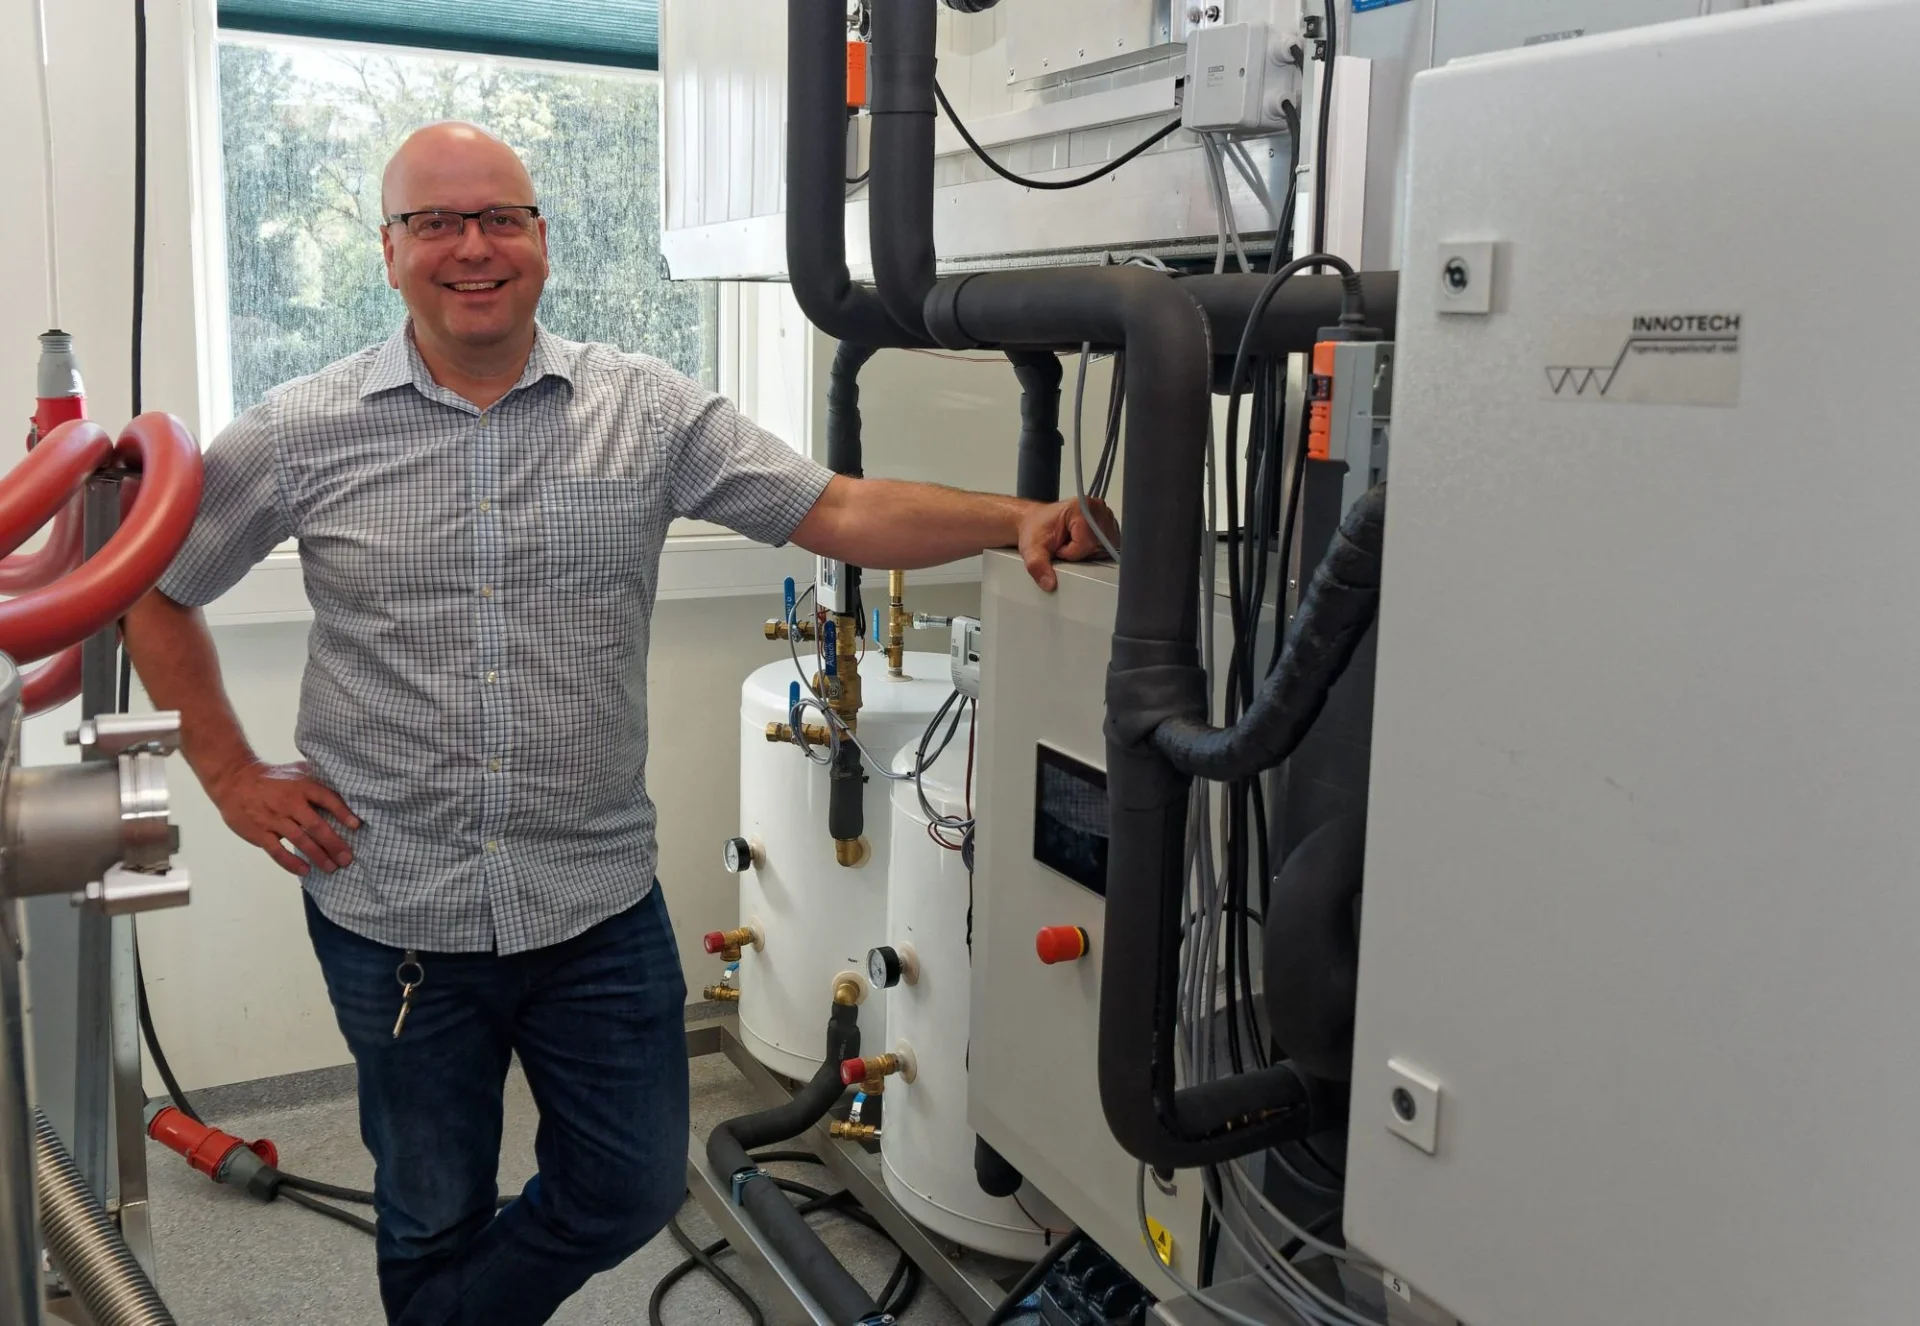 Michael Bantle tells Gemini that the demand for high-temperature heat pumps is so great that manufacturers are struggling to produce sufficient numbers. Photo: Georg Mathisen